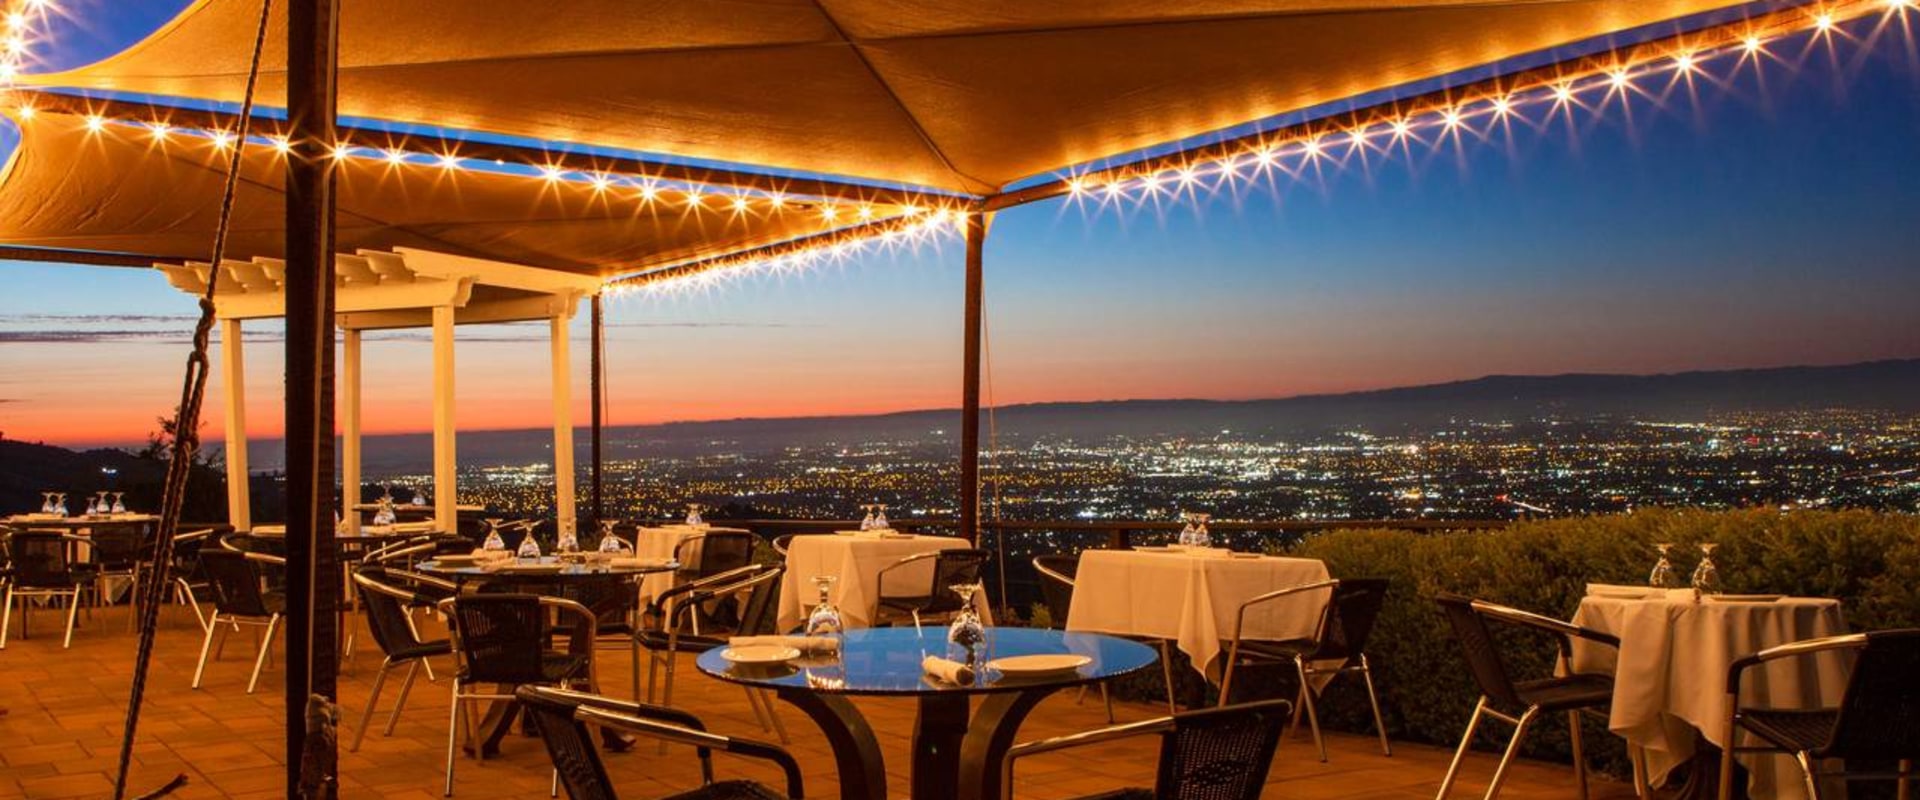 Outdoor Dining with a View in Clark County, Nevada - A Unique Experience